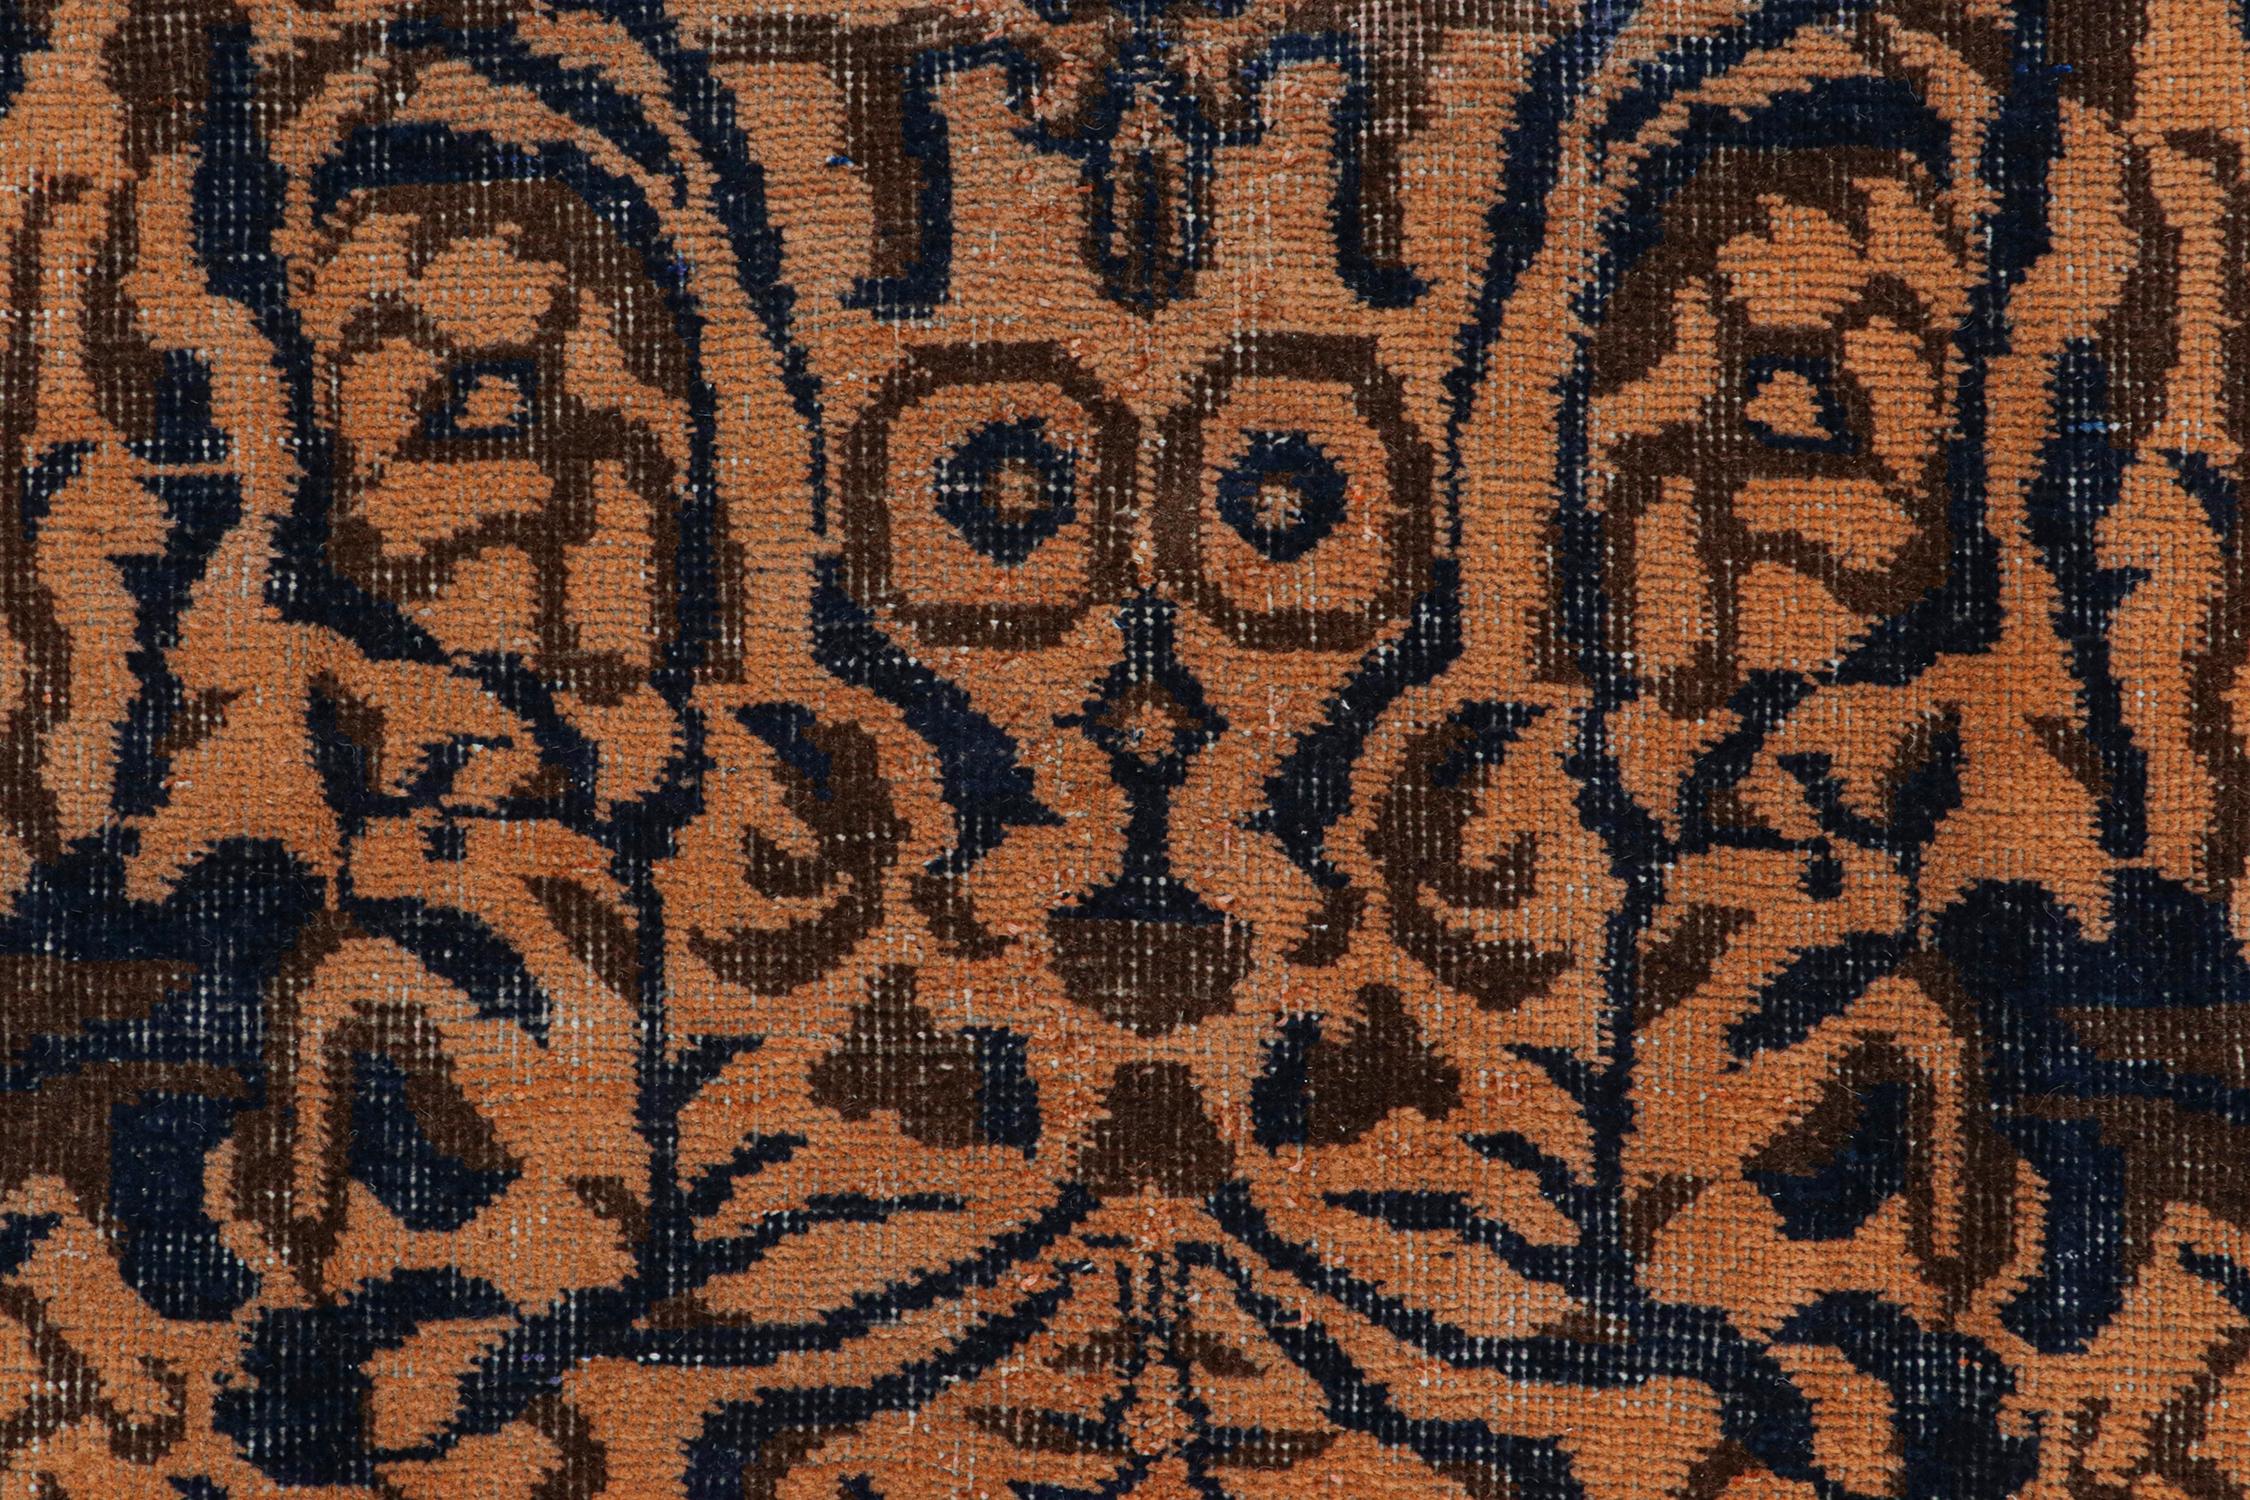 Vintage Zeki Müren Rug in Orange with Brown and Blue Patterns by Rug & Kilim In Good Condition For Sale In Long Island City, NY